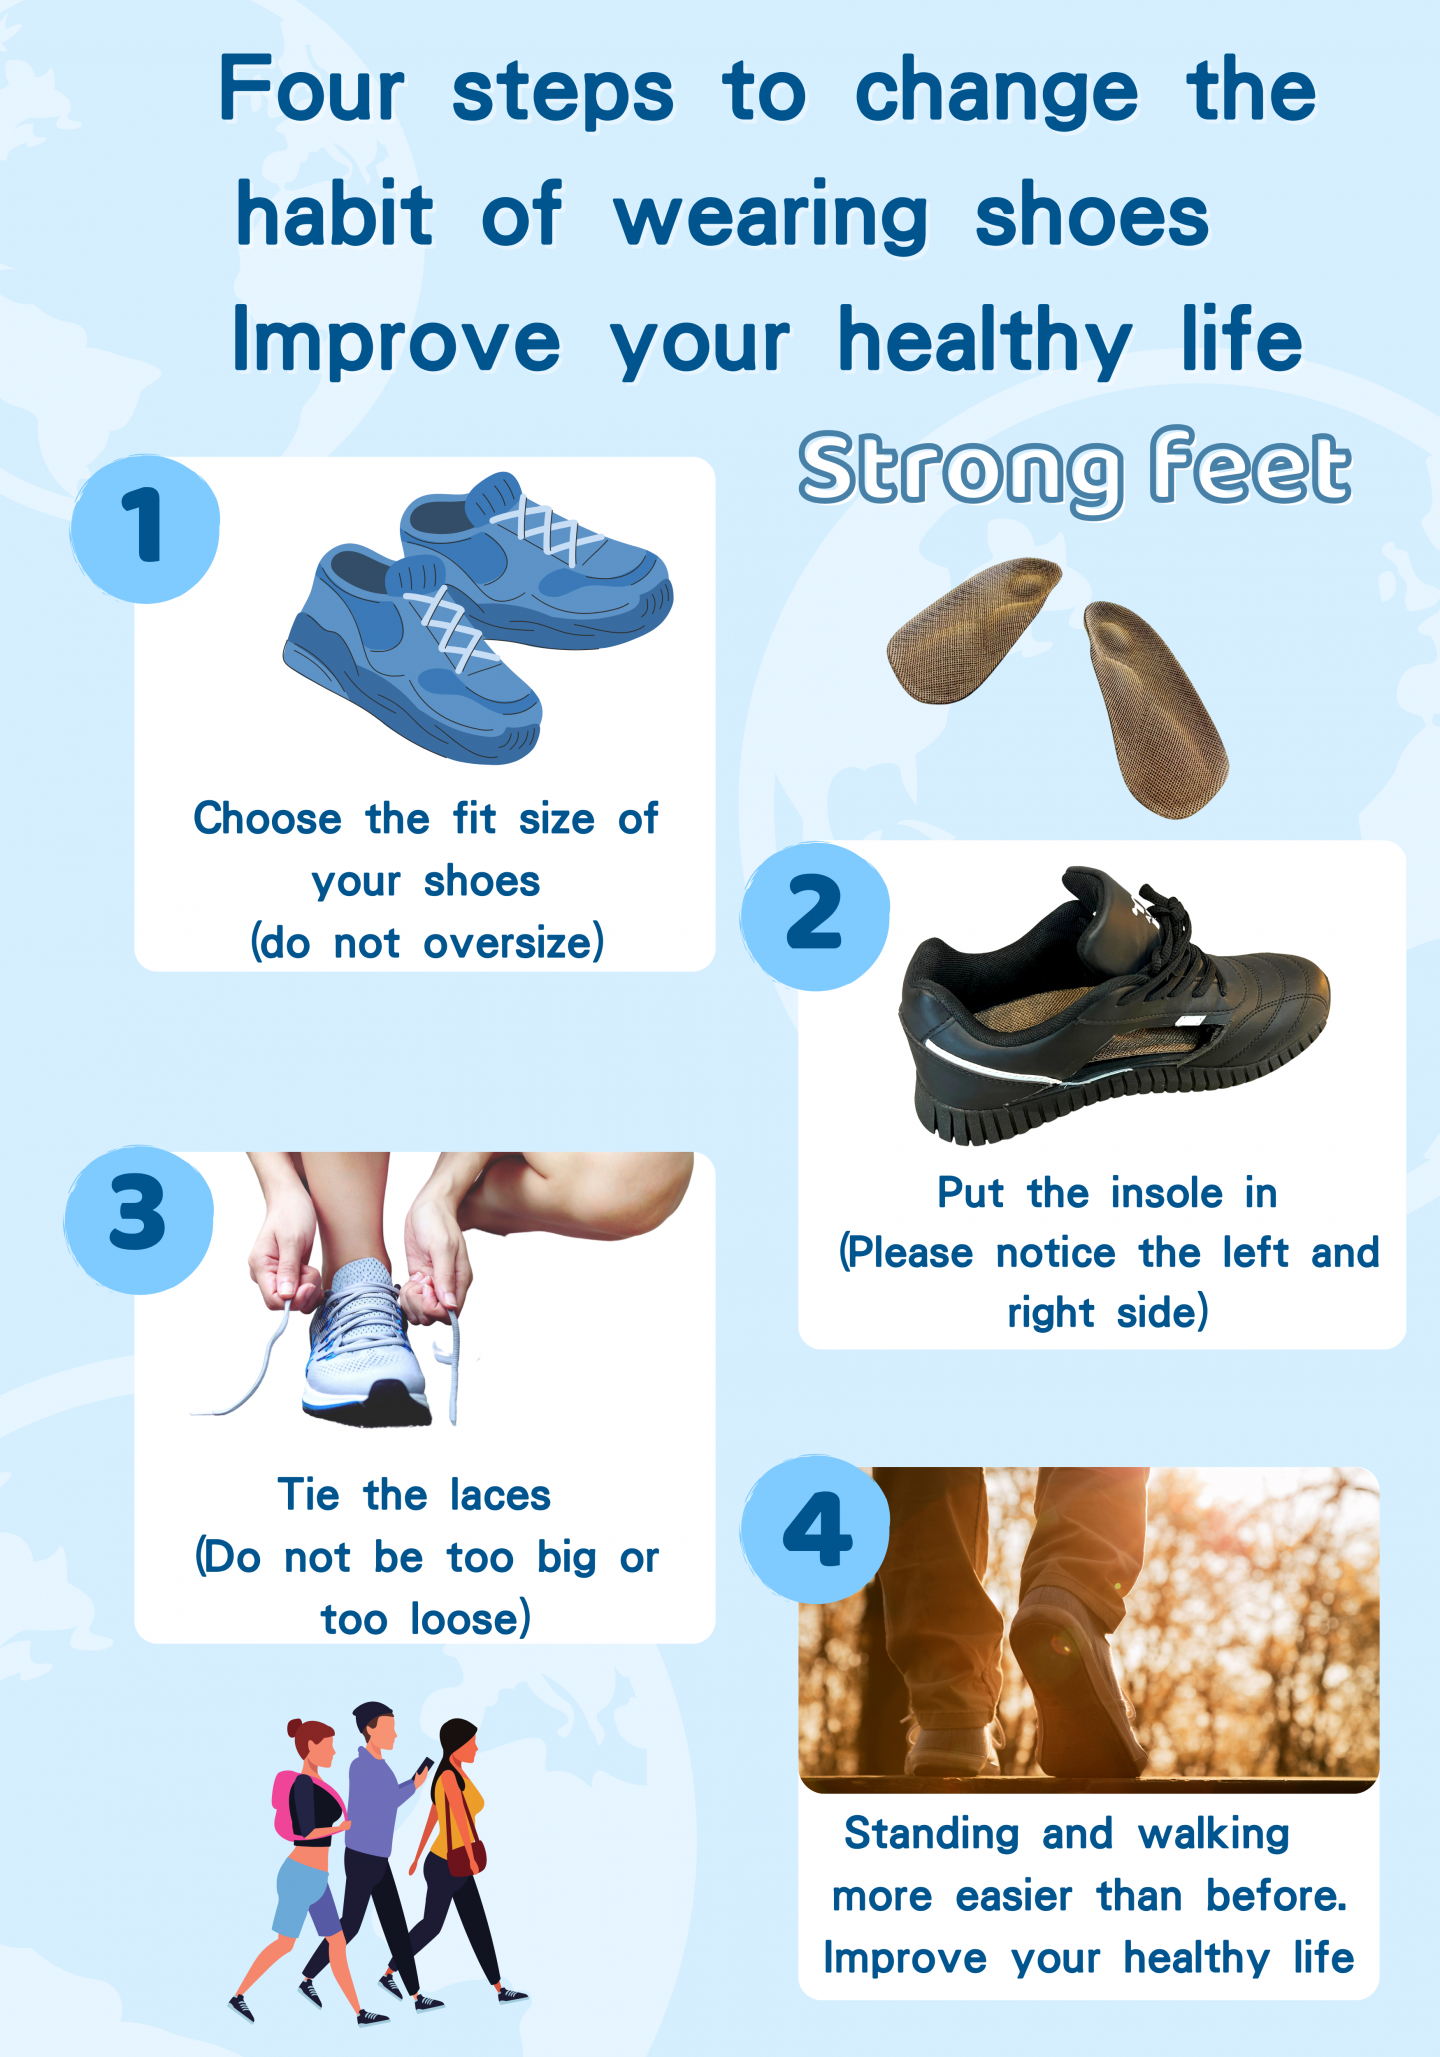 Four steps to change the habit of wearing shoes and improve your healthy life